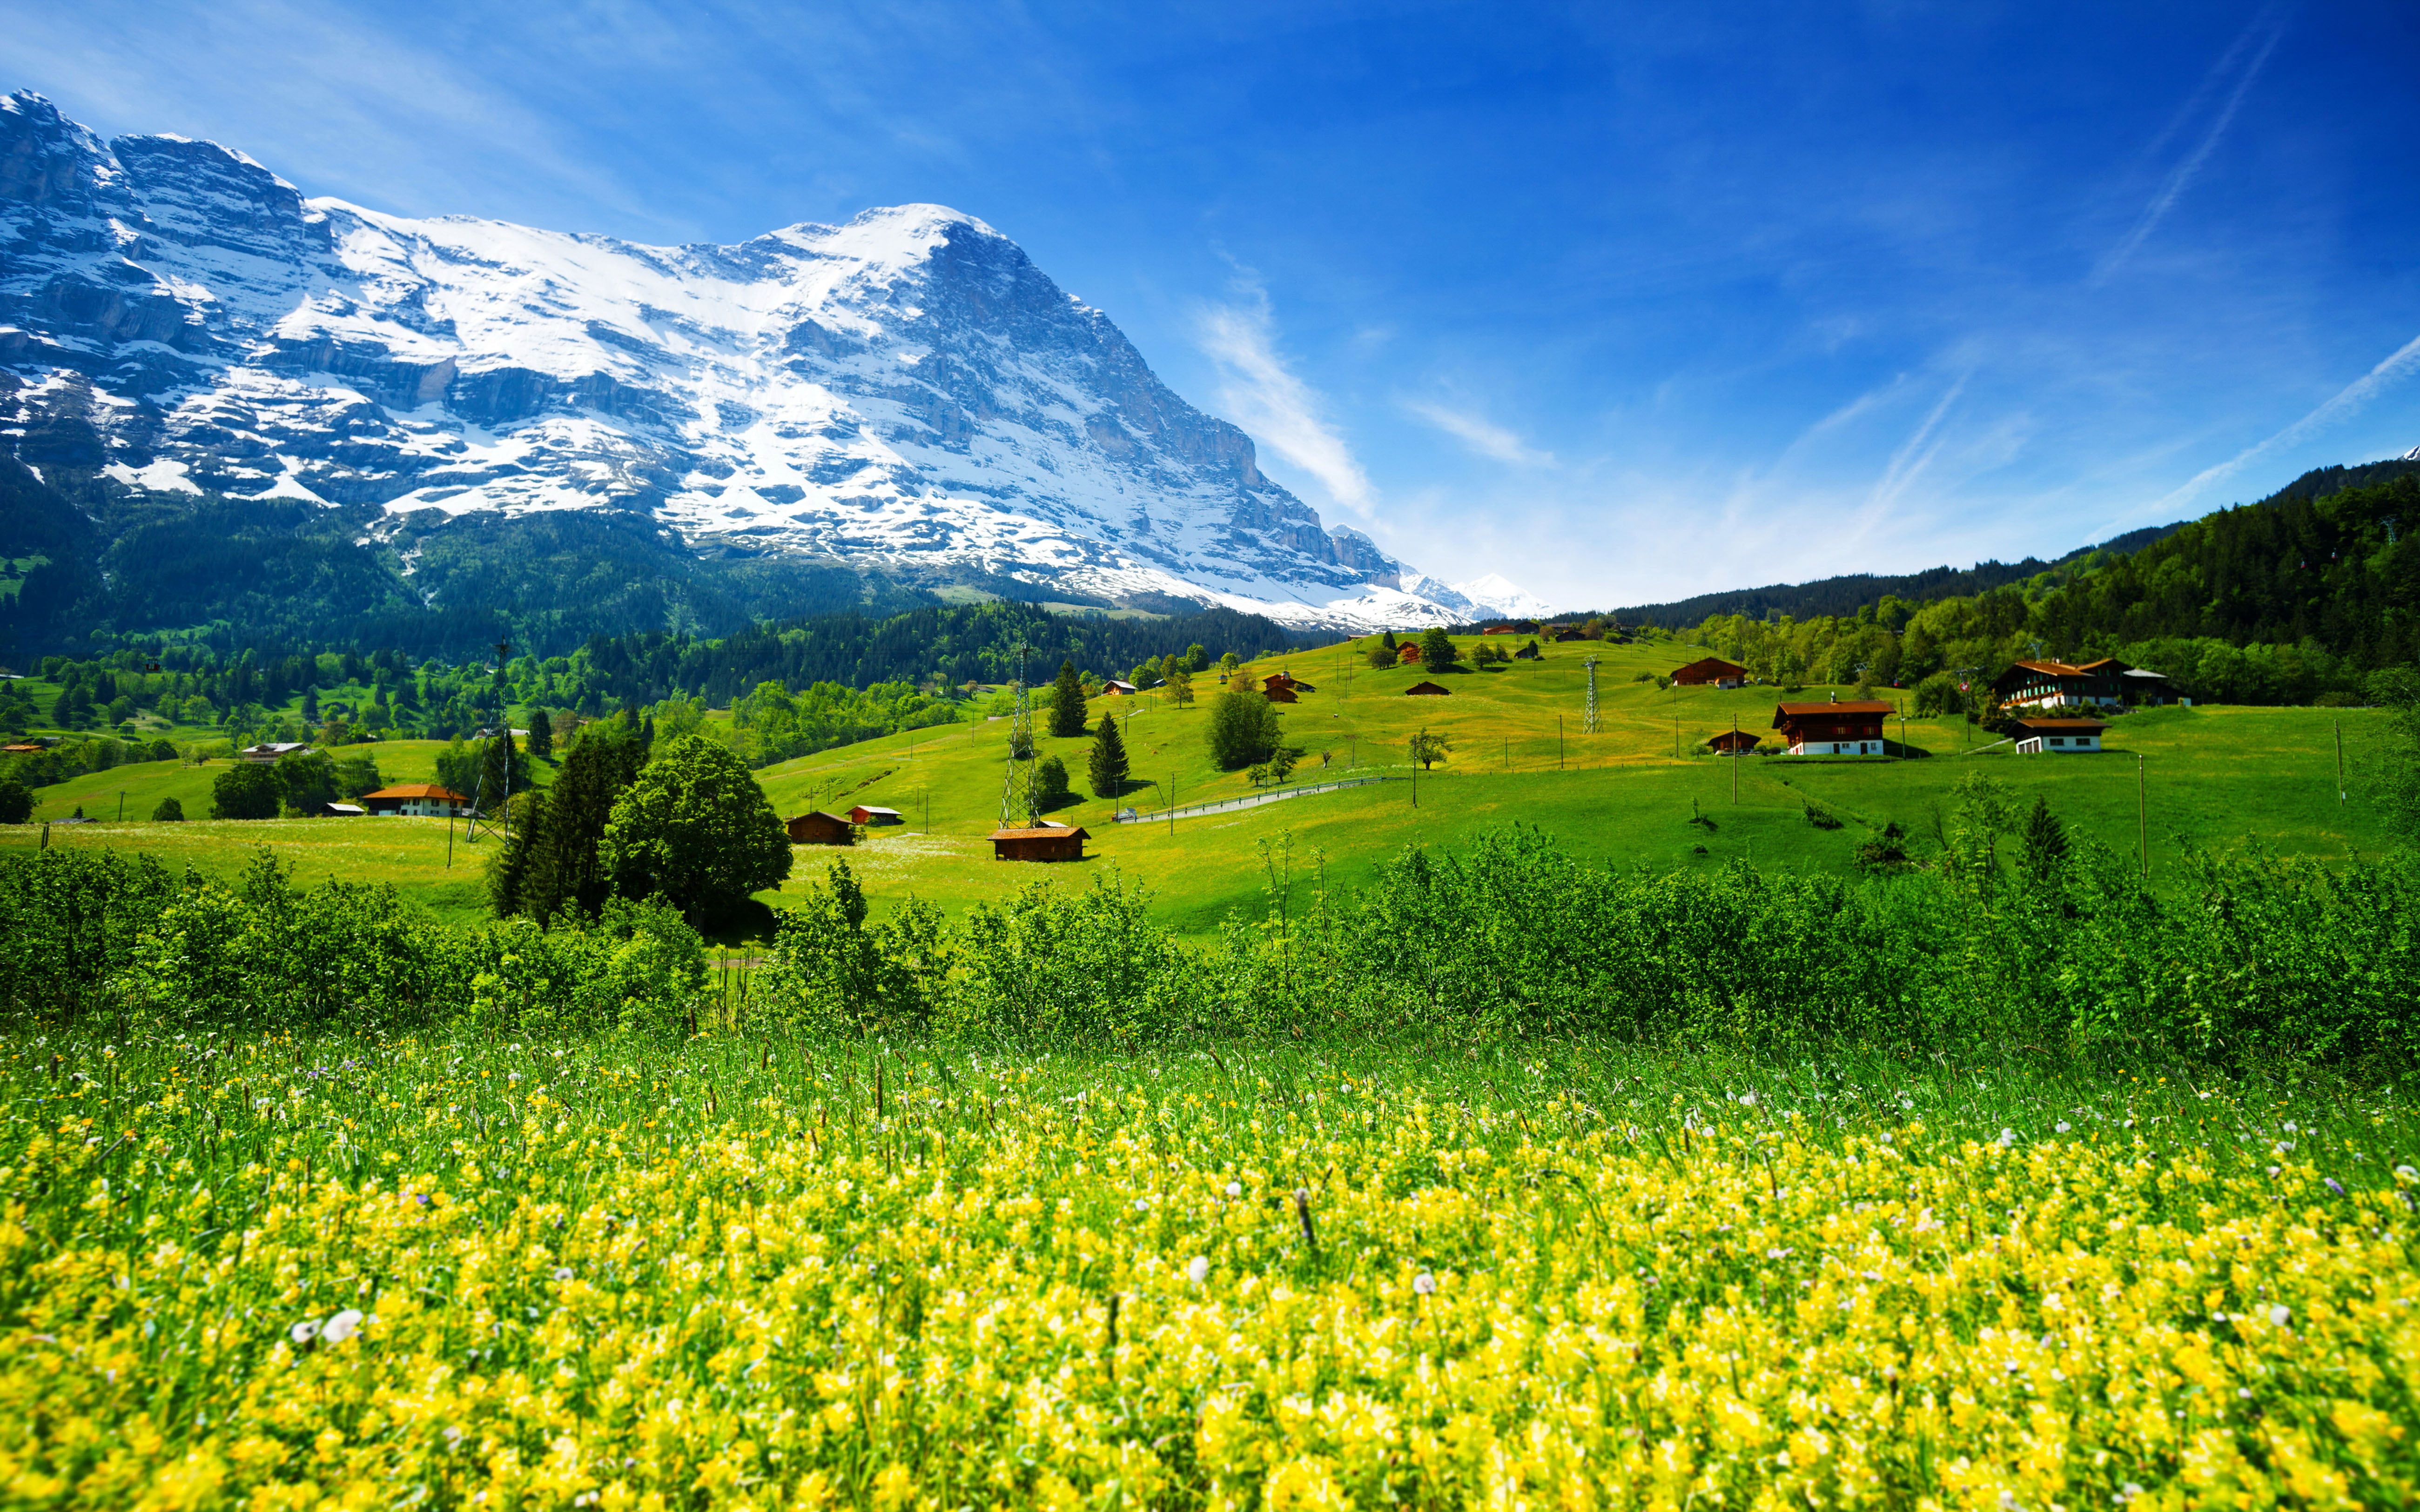 Spring Landscape Nature Switzerland Meadow With Yellow Flowers And Green Grass Mountainous Village. Switzerland wallpaper, Landscape, Landscape photography nature